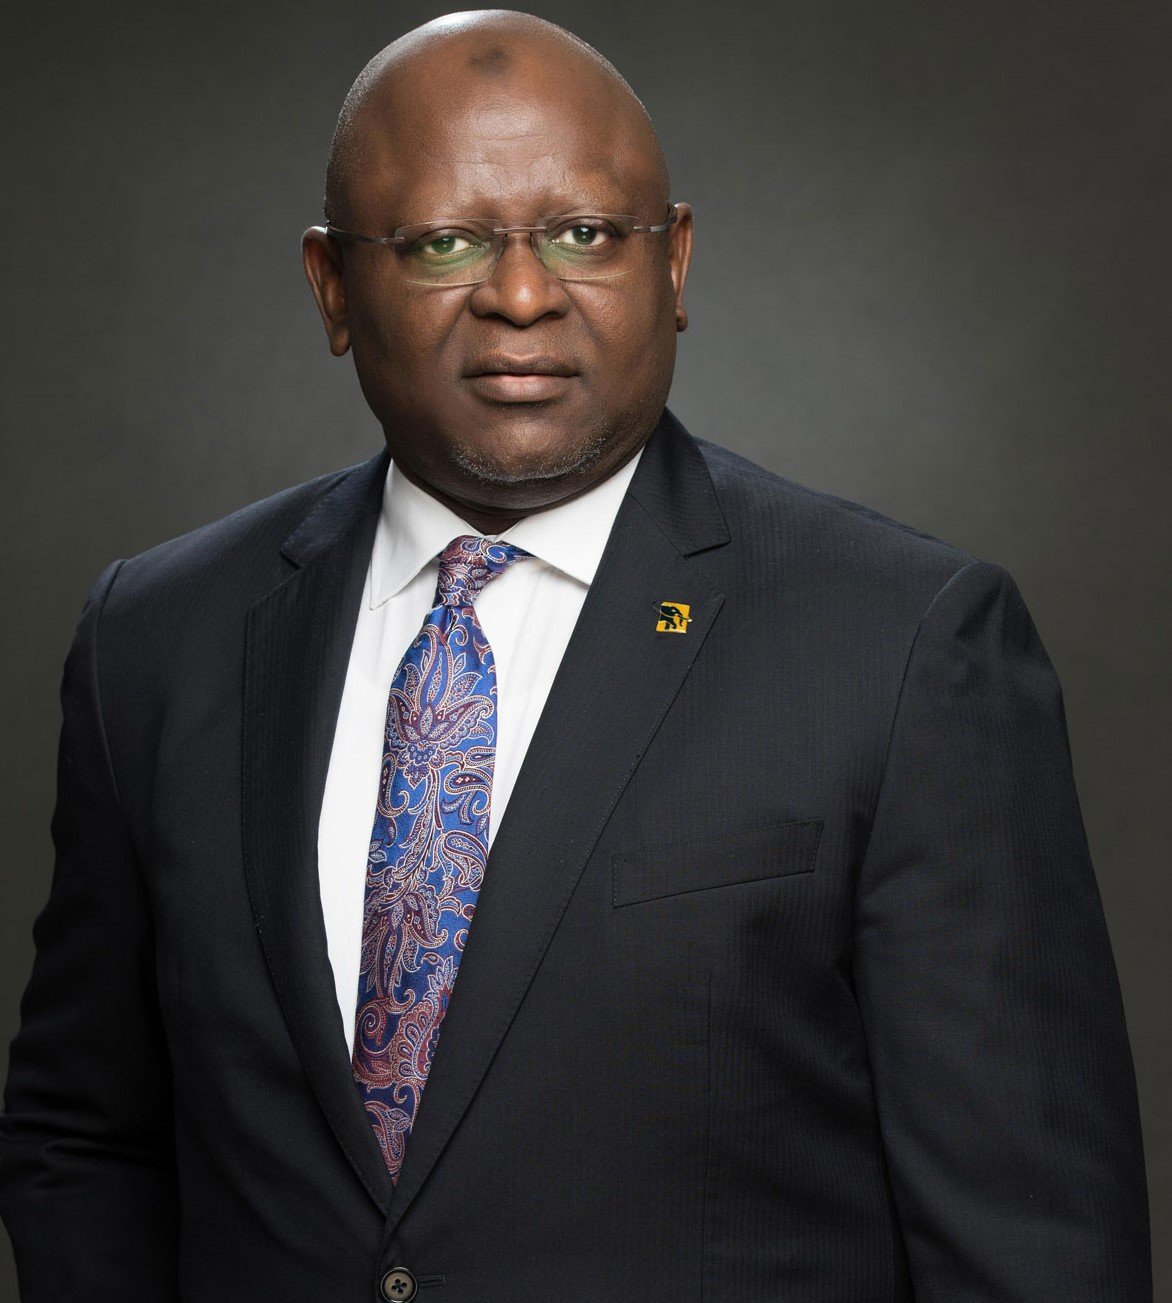 FirstBank,Lagos State partner to provide…